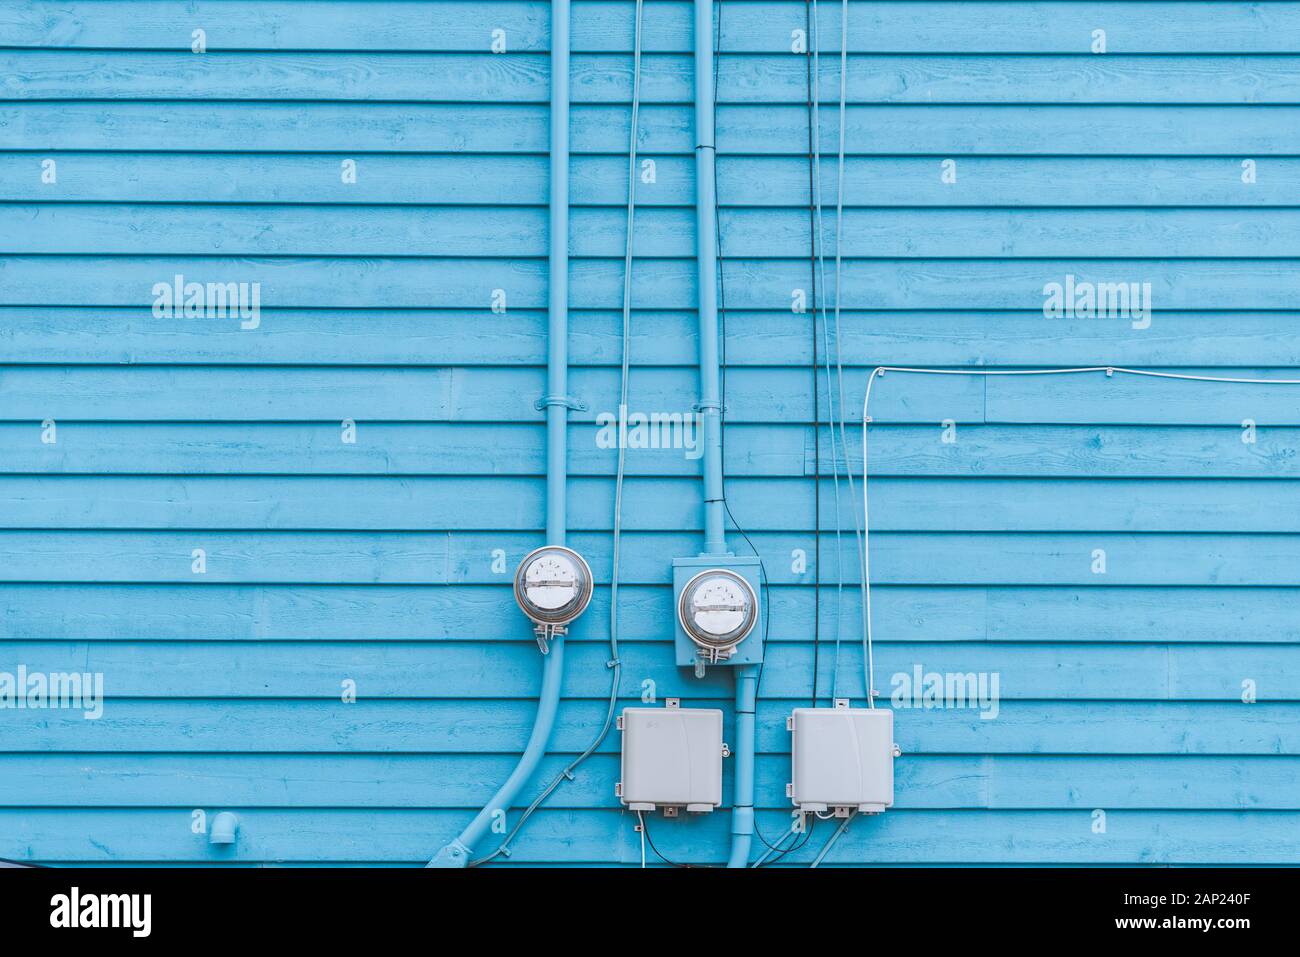 Kilowatt hour meters installed on the wall. Analog electricity meter on pastel blue background. Wooden boards pattern Stock Photo